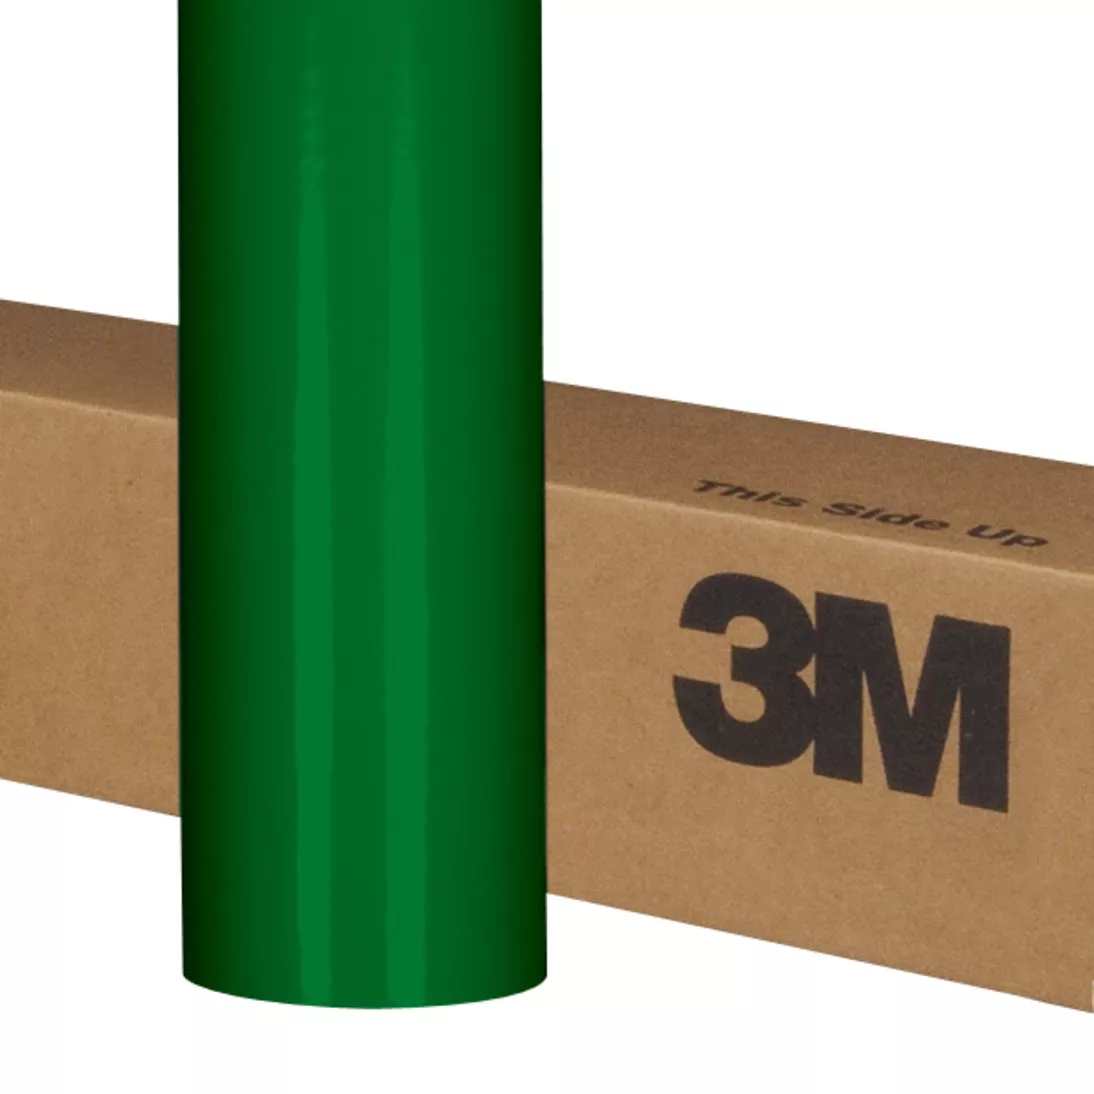 3M™ Controltac™ Graphic Film with Comply™ Adhesive 180mC-186, Bright
Green, 48 in x 50 yd, 1 Roll/Case